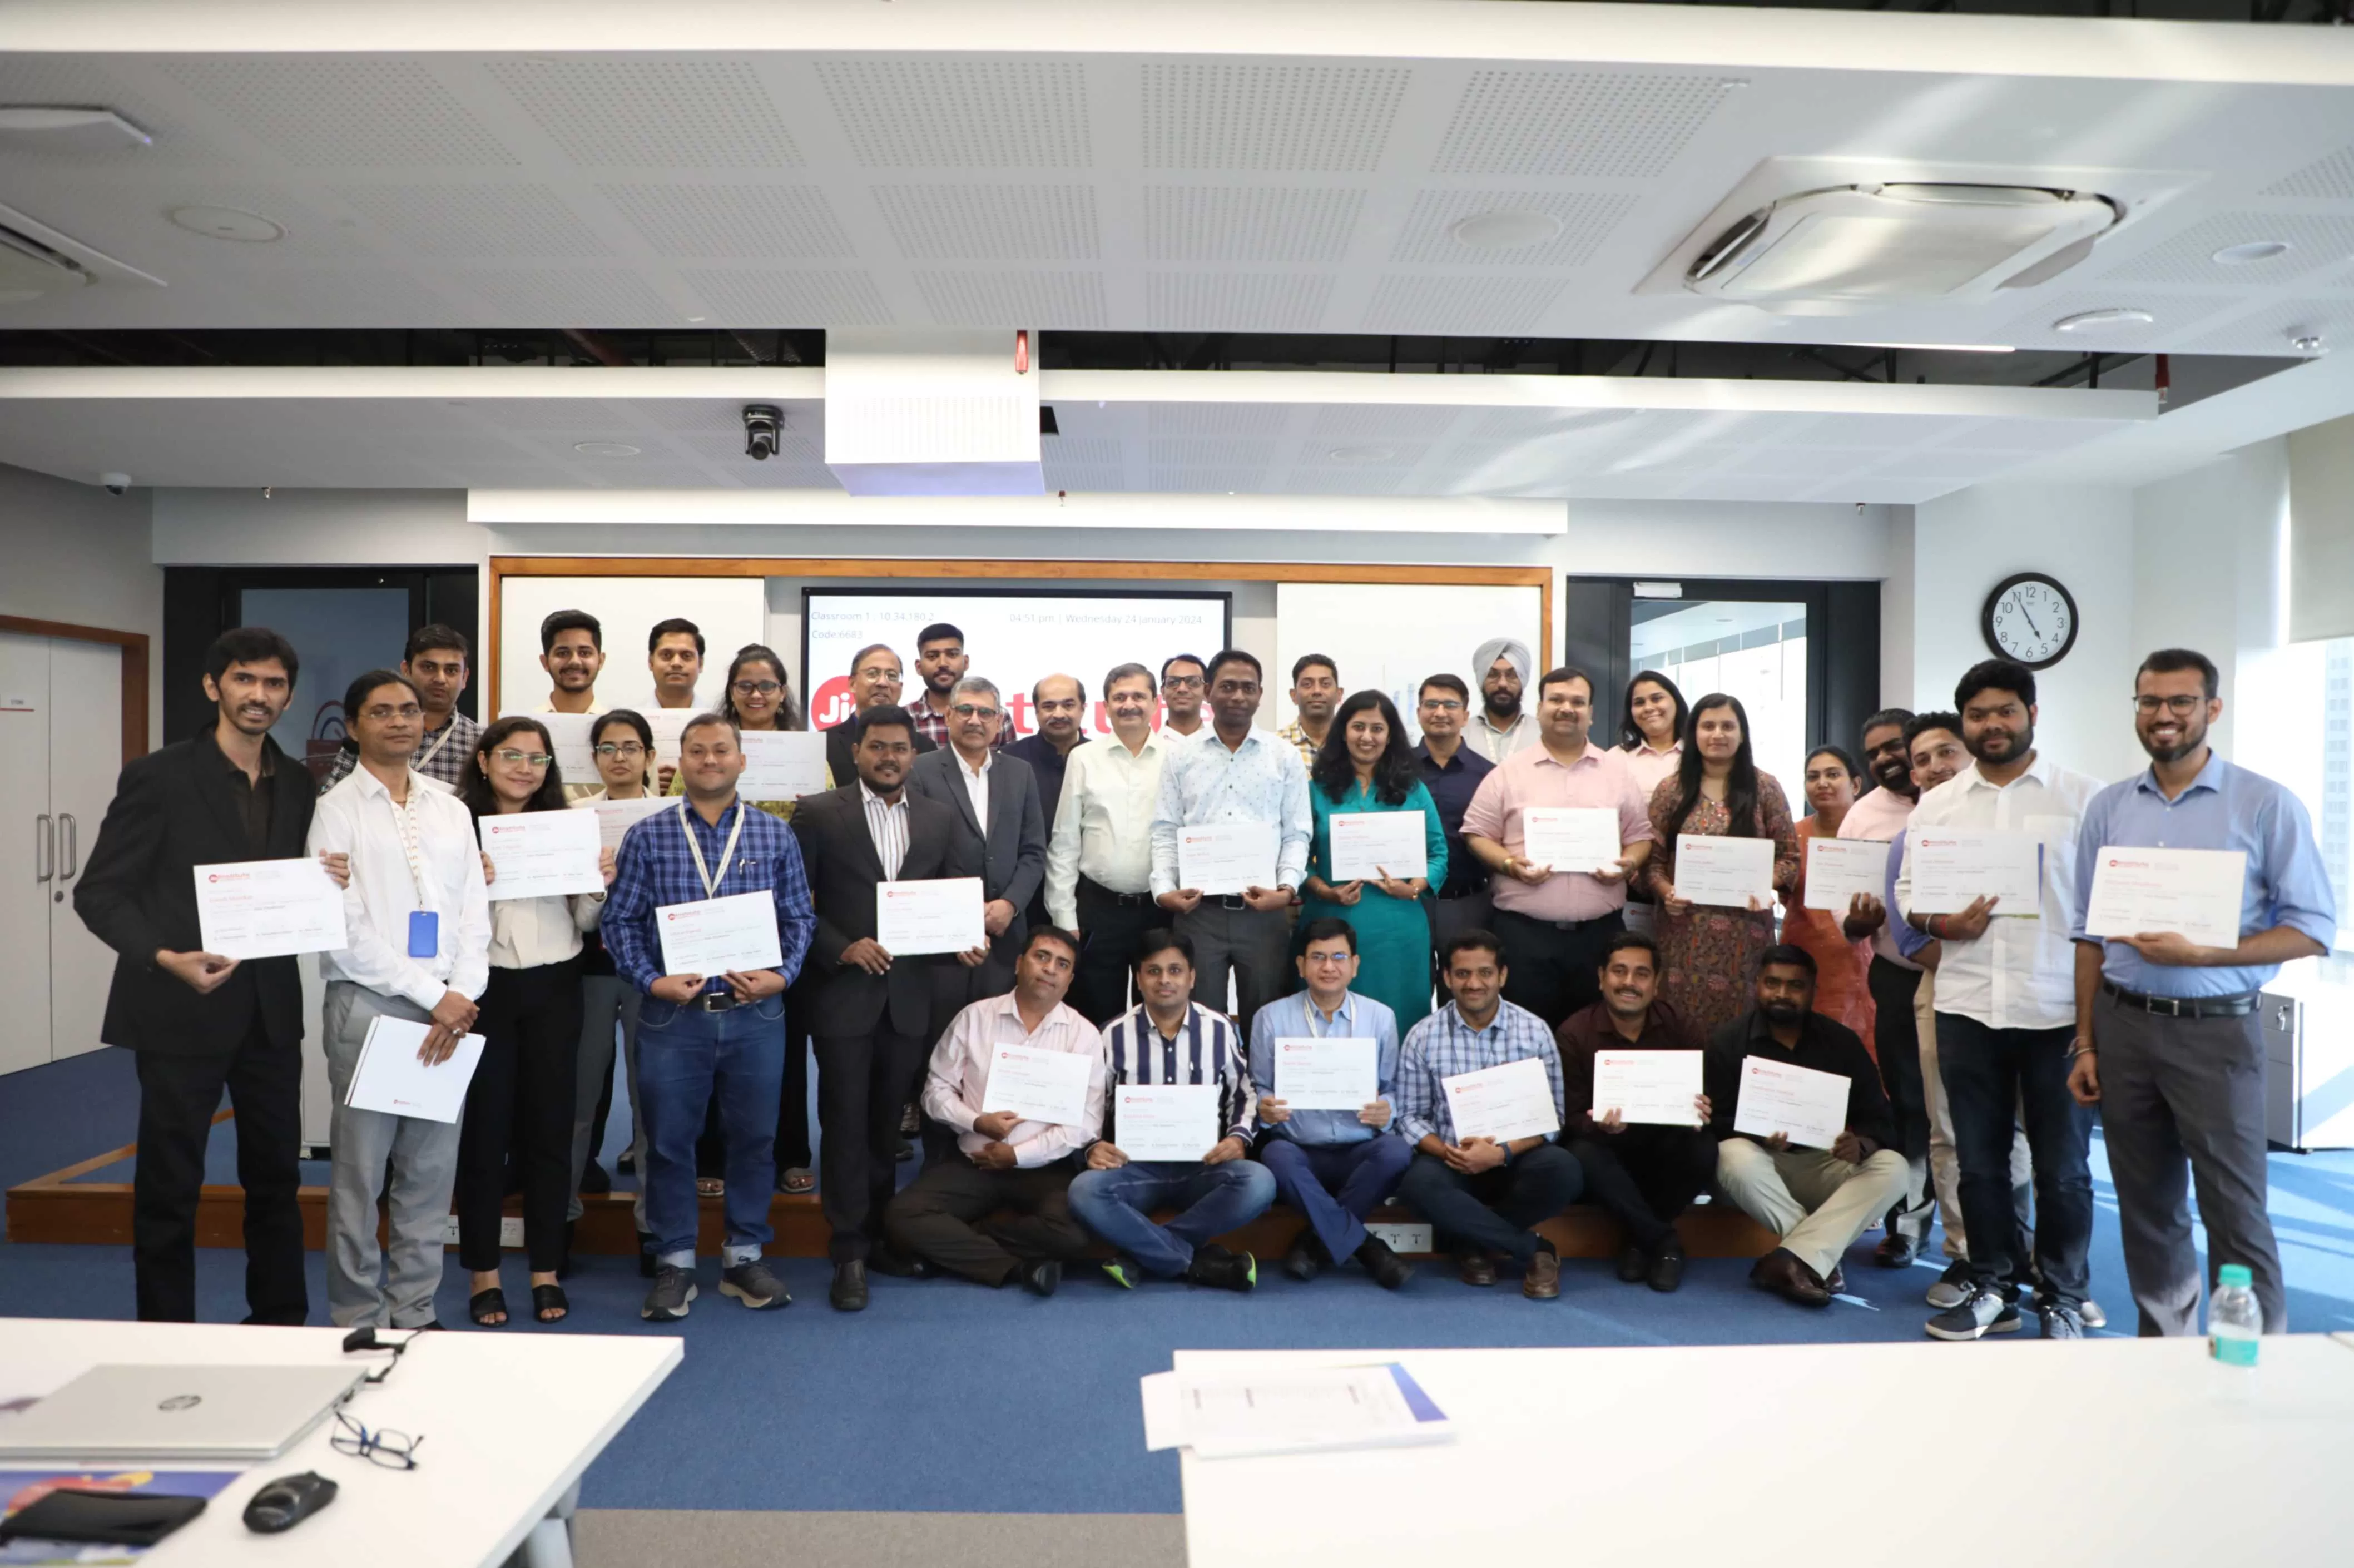 Participants and organizers posing after certification